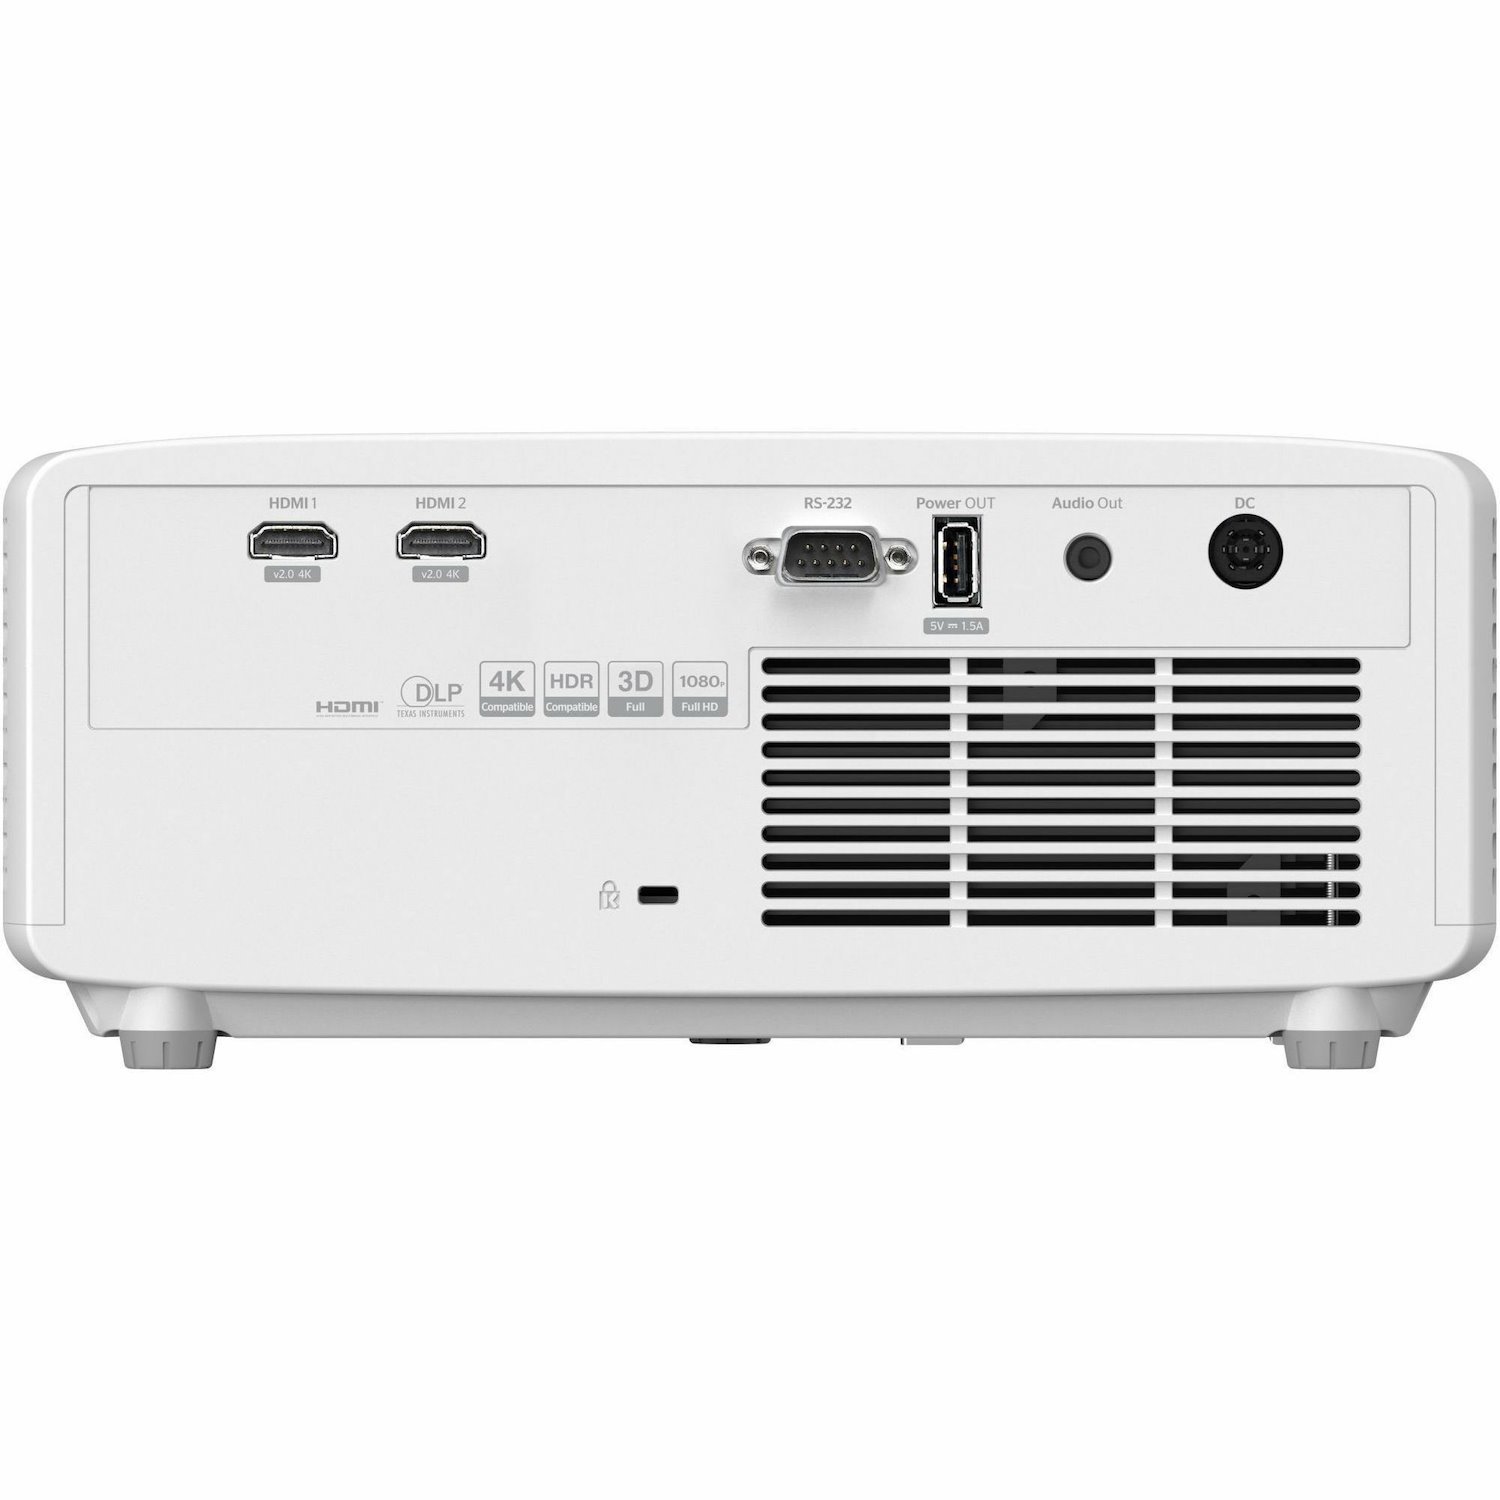 Optoma HZ40HDR 3D DLP Projector - 16:9 - Portable